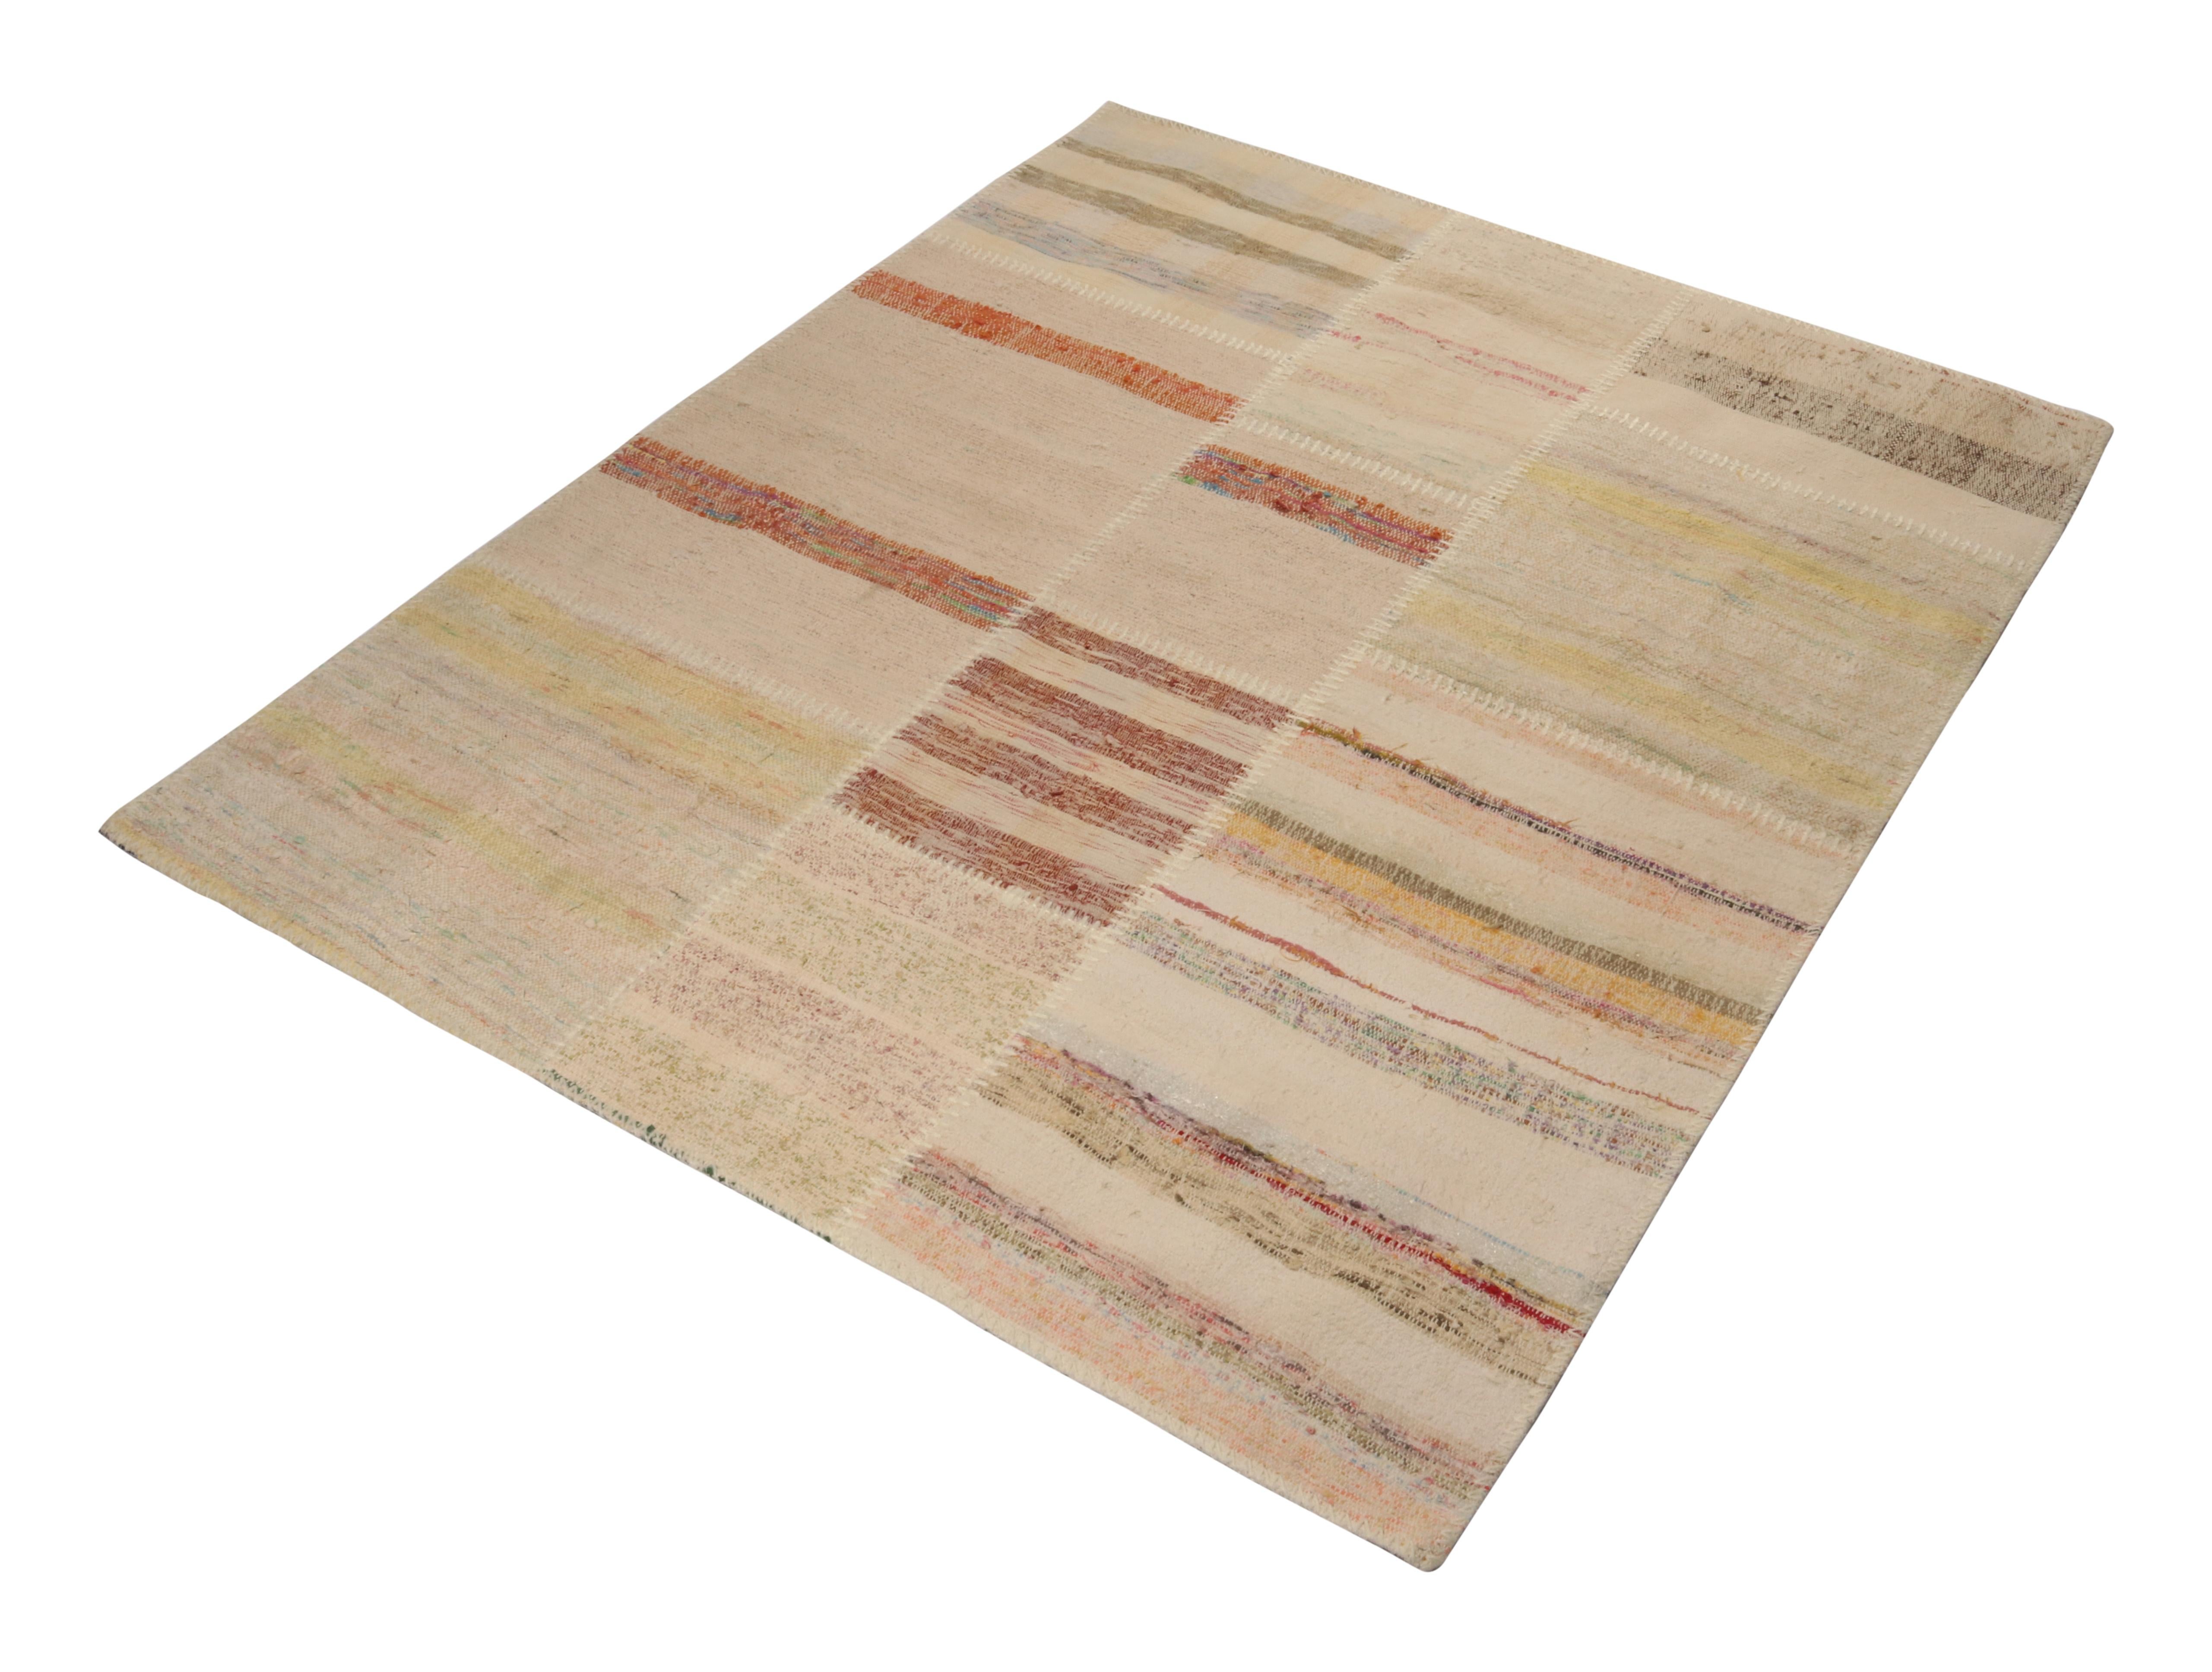 Handwoven in wool, Rug & Kilim presents a 4x5 rug from their innovative new patchwork kilim collection. 

On the Design: 

This flat weave technique repurposes vintage yarns in polychromatic stripes and striae, achieving a playful look with fabulous